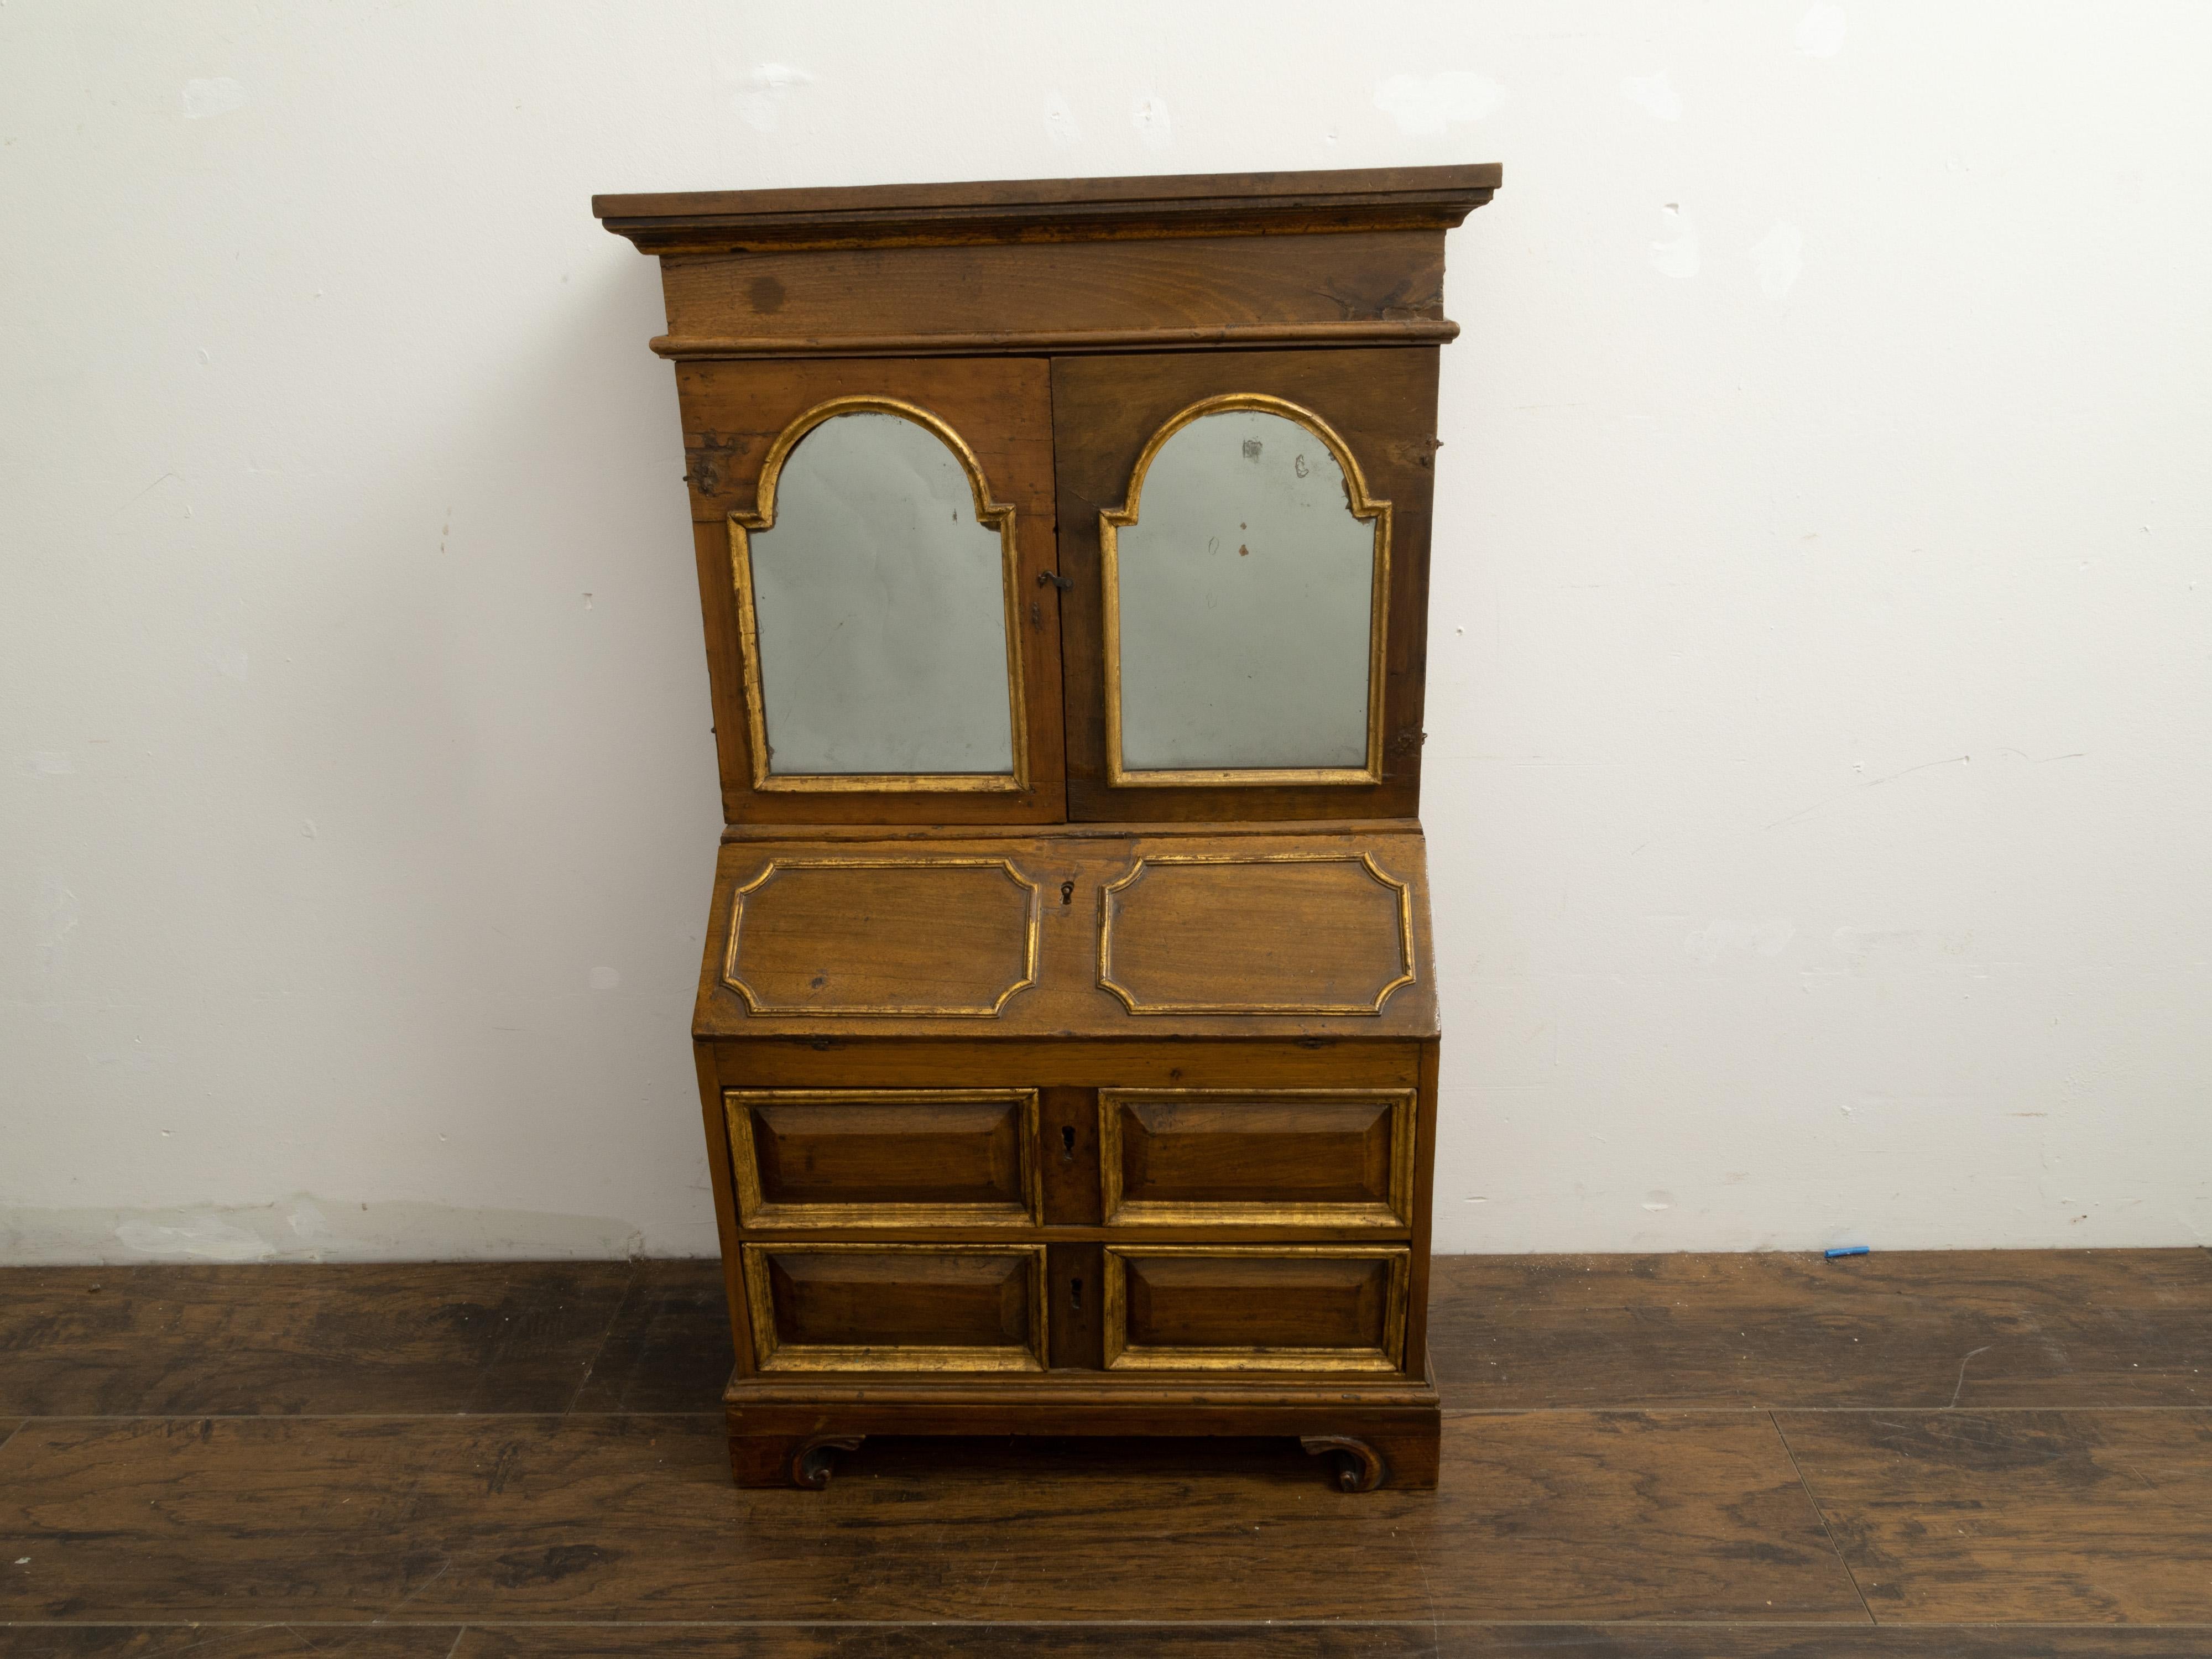 A French miniature slant front secretary from the 19th century, with arched mirrors and gilt accents. Created in France during the 19th century, this miniature slant front secretary features a molded cornice sitting above two doors adorned with